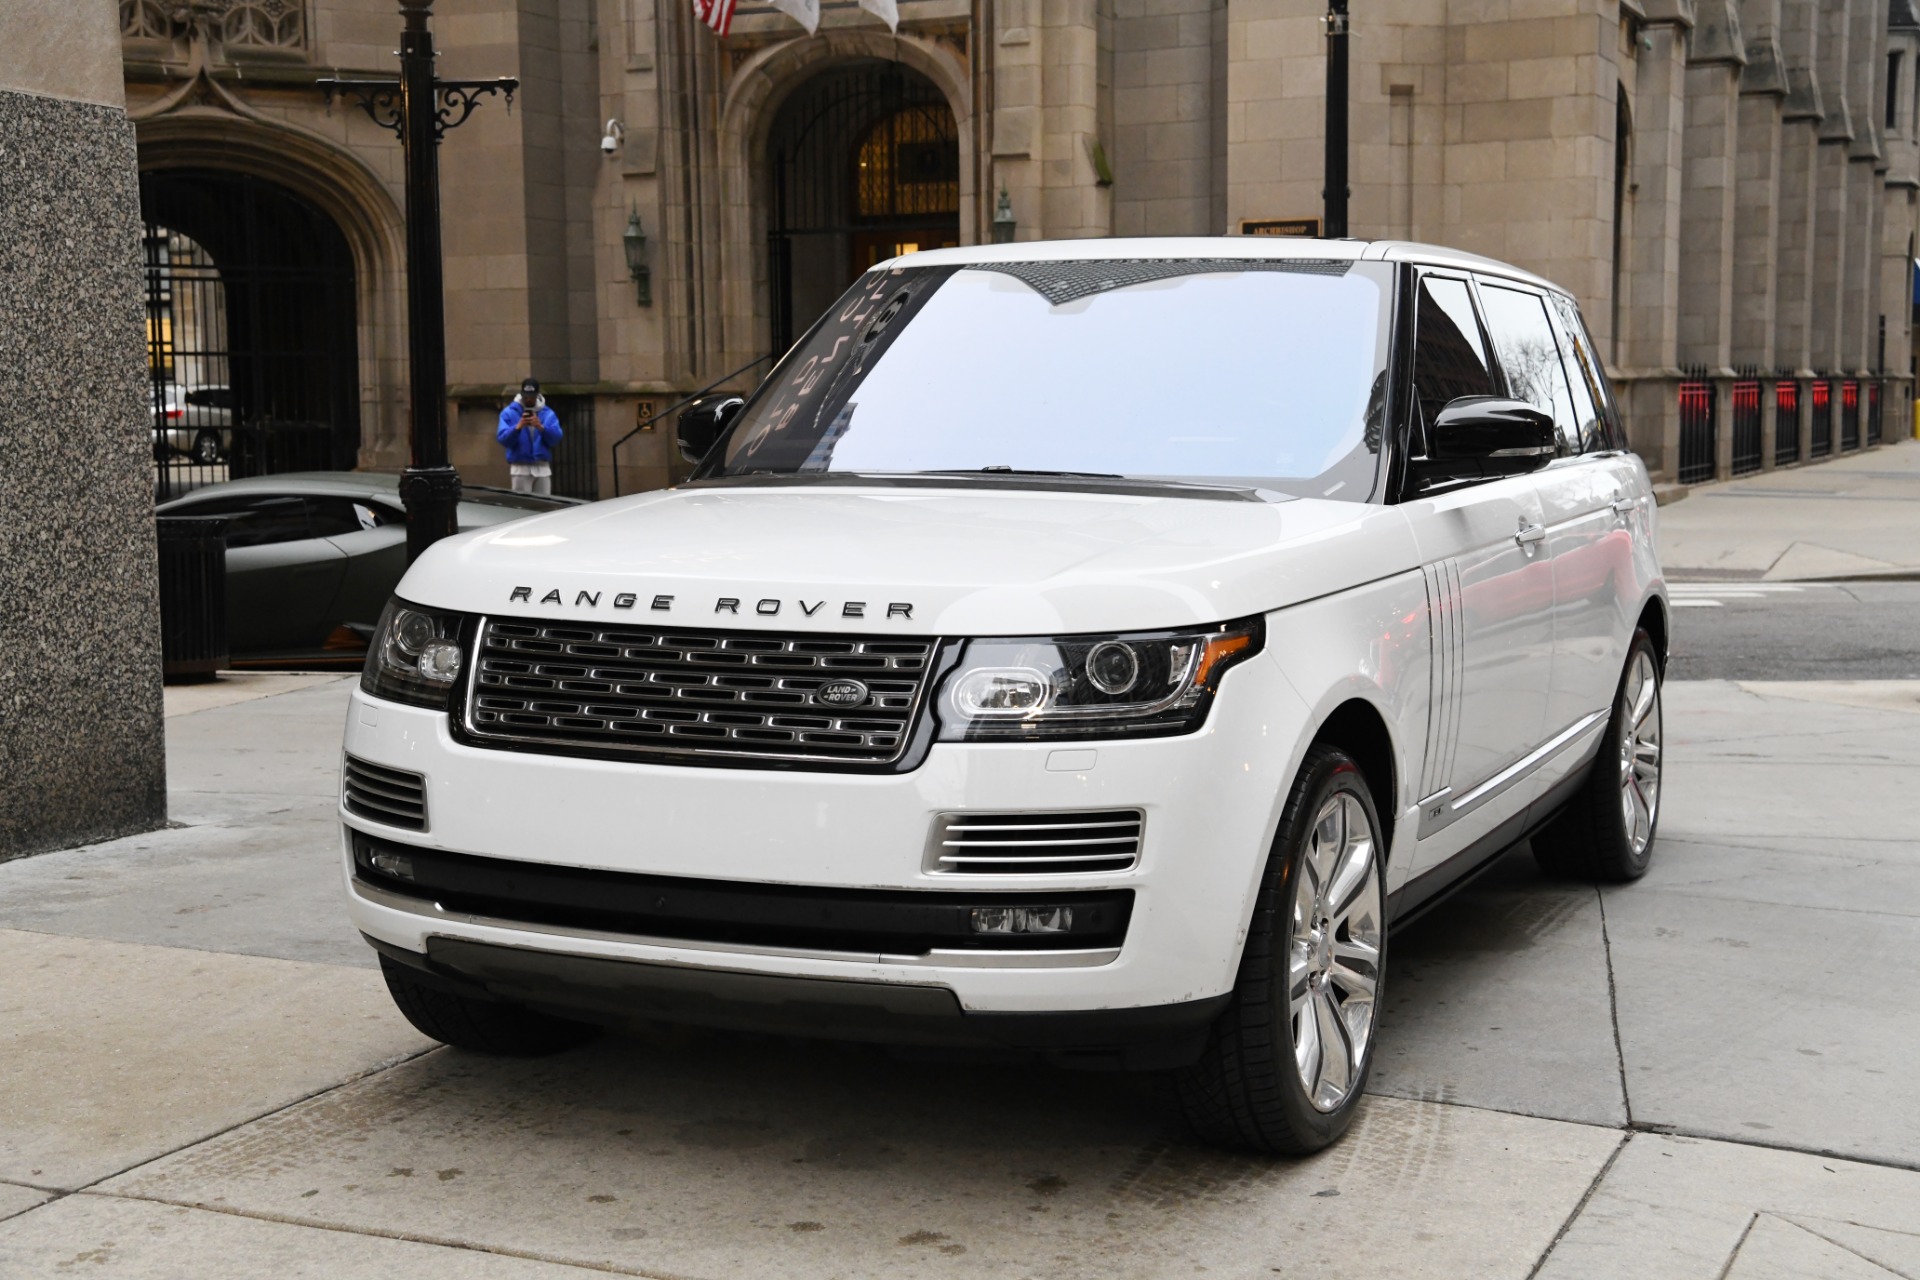 Used 2017 Land Rover Range Rover SV Autobiography LWB | Chicago, IL